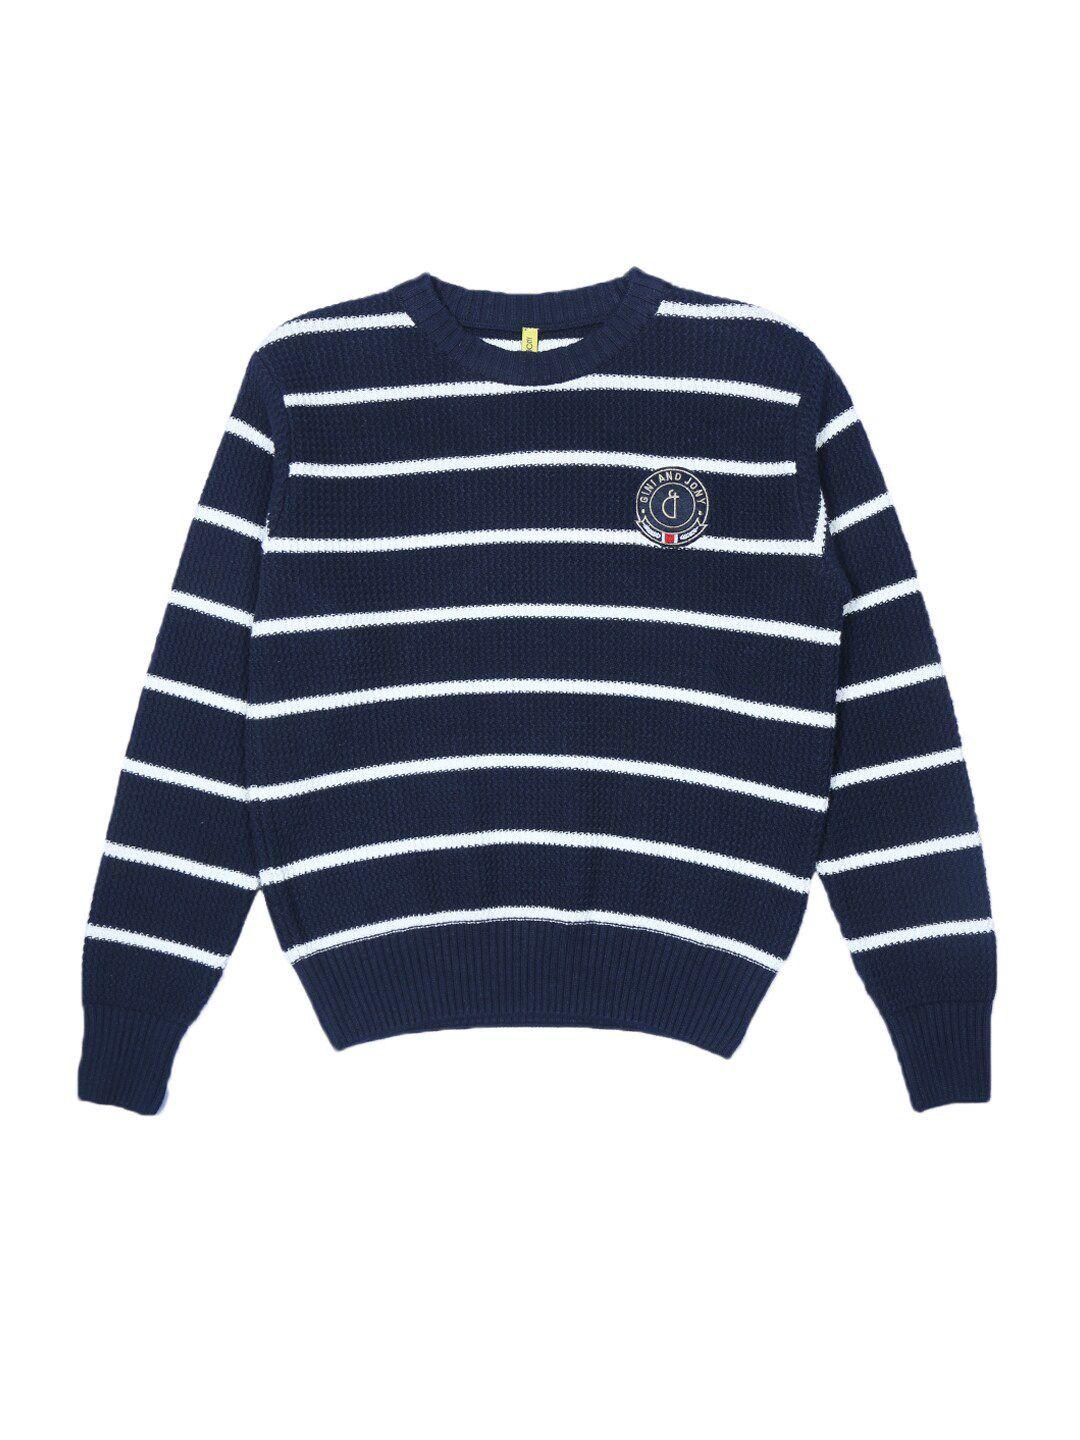 gini-and-jony-boys-navy-blue-&-white-striped-pullover-sweaters